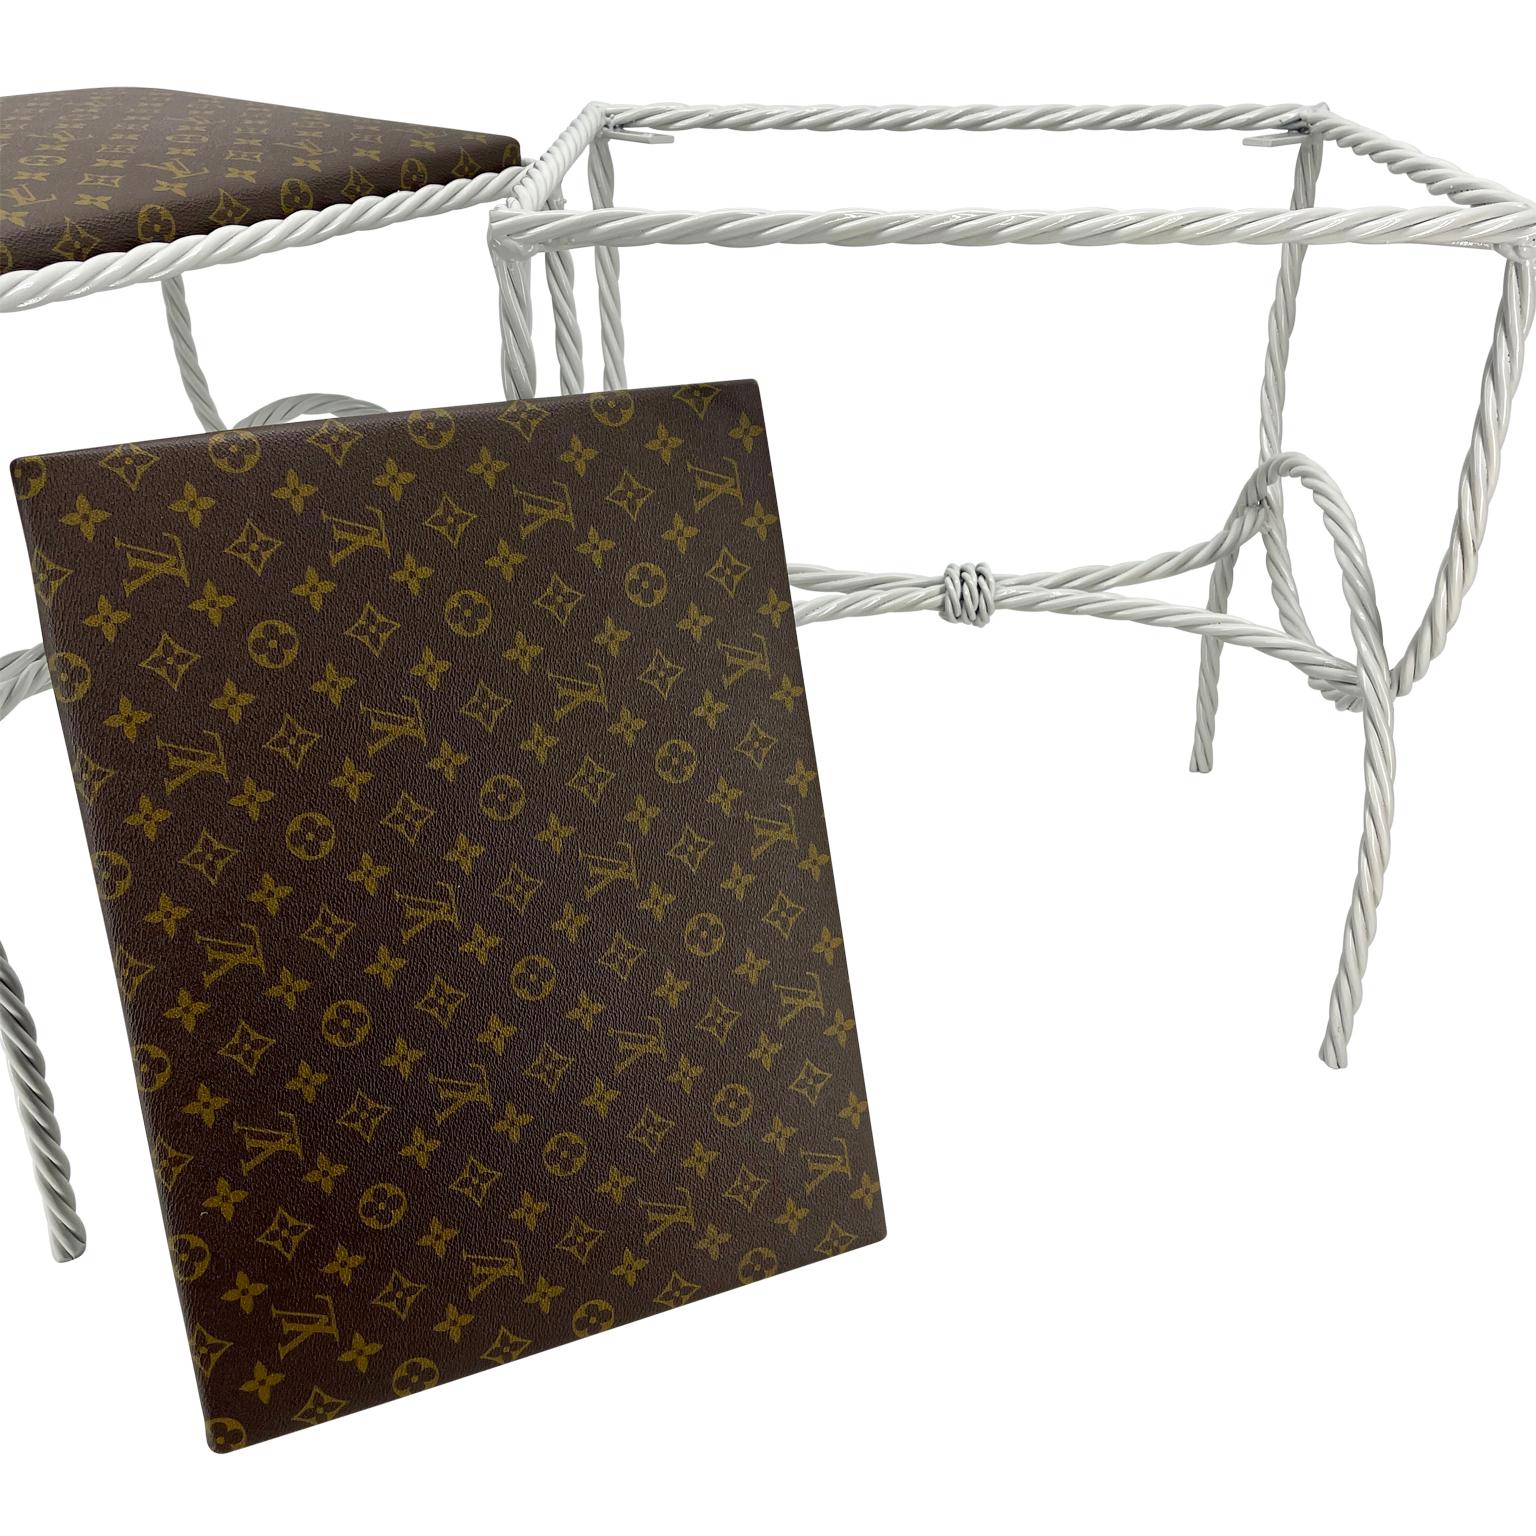 Pair of Roped Iron Benches Side Tables with Louis Vuitton Monogram Fabric For Sale 2